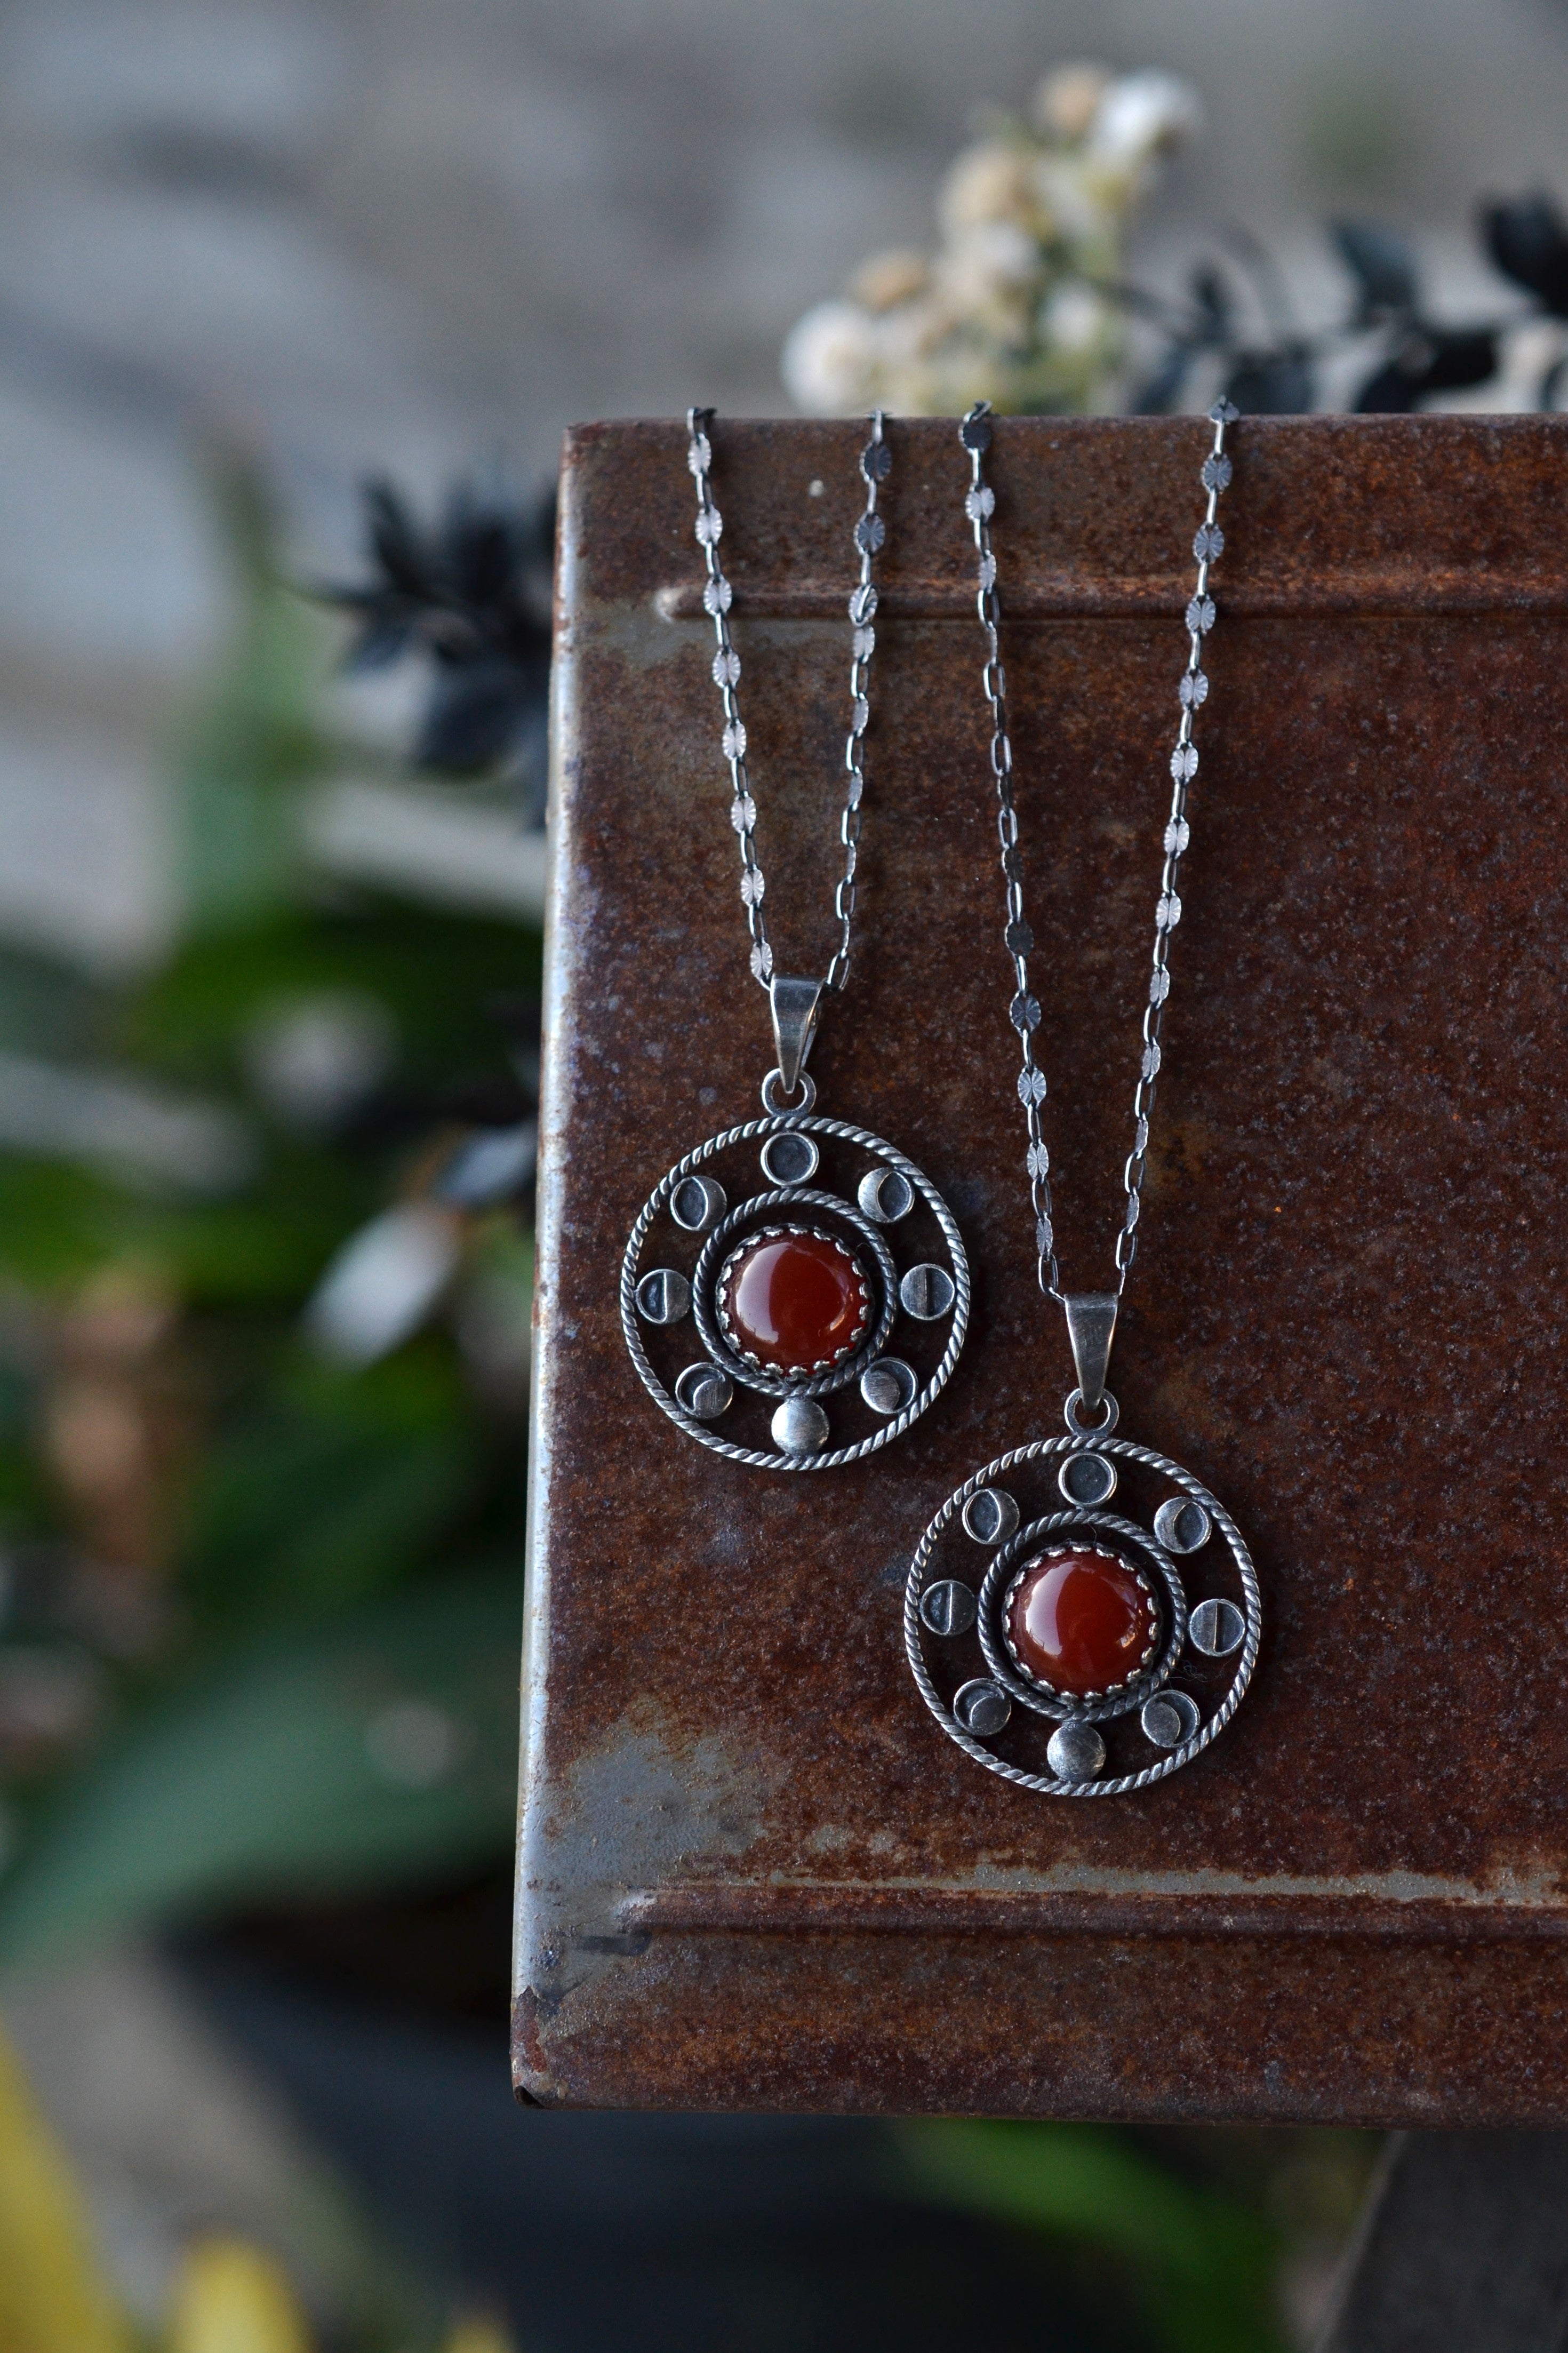 Only 1 Left! Moon Phase Carnelian Necklace - 18” Chain Included